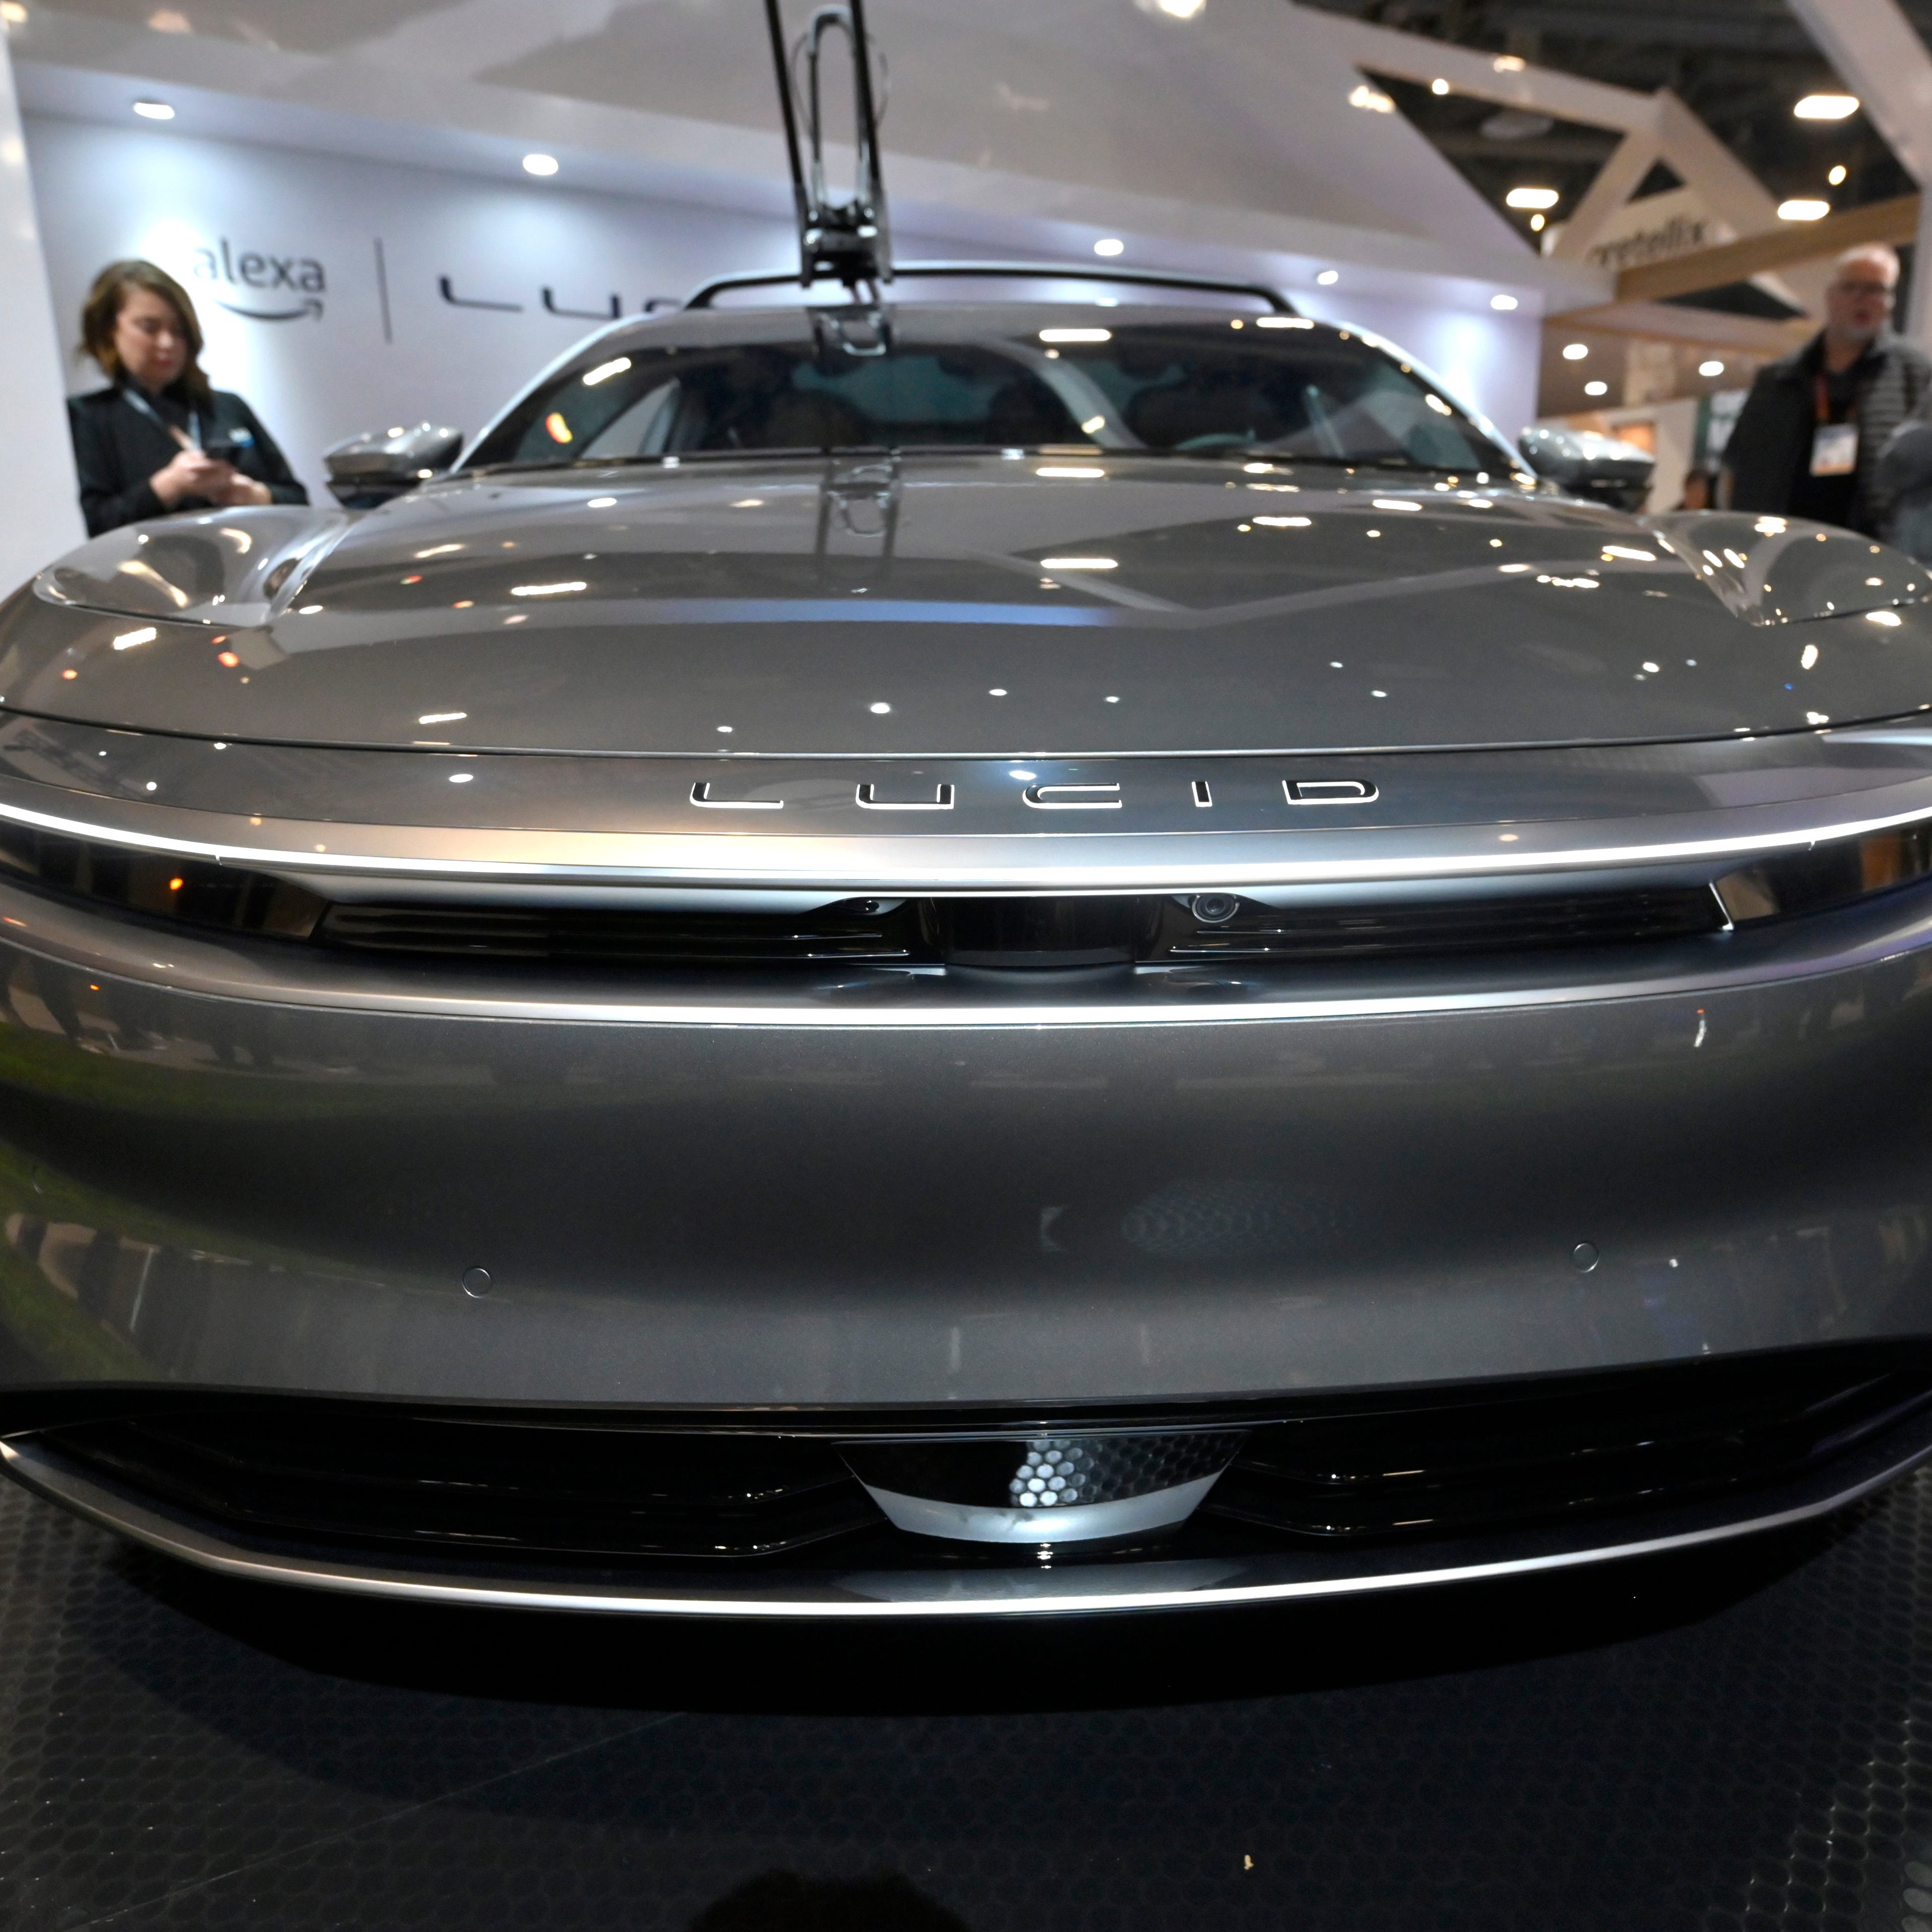 LAS VEGAS, NEVADA - JANUARY 05: A Lucid electric car equipped with Alexa Built-In is displayed at the Amazon for Automotive booth at CES 2023 at the Las Vegas Convention Center on January 05, 2023 in Las Vegas, Nevada. CES, the world's largest annual consumer technology trade show, runs through January 08 and features about 3,200 exhibitors showing off their latest products and services to more than 100,000 attendees.